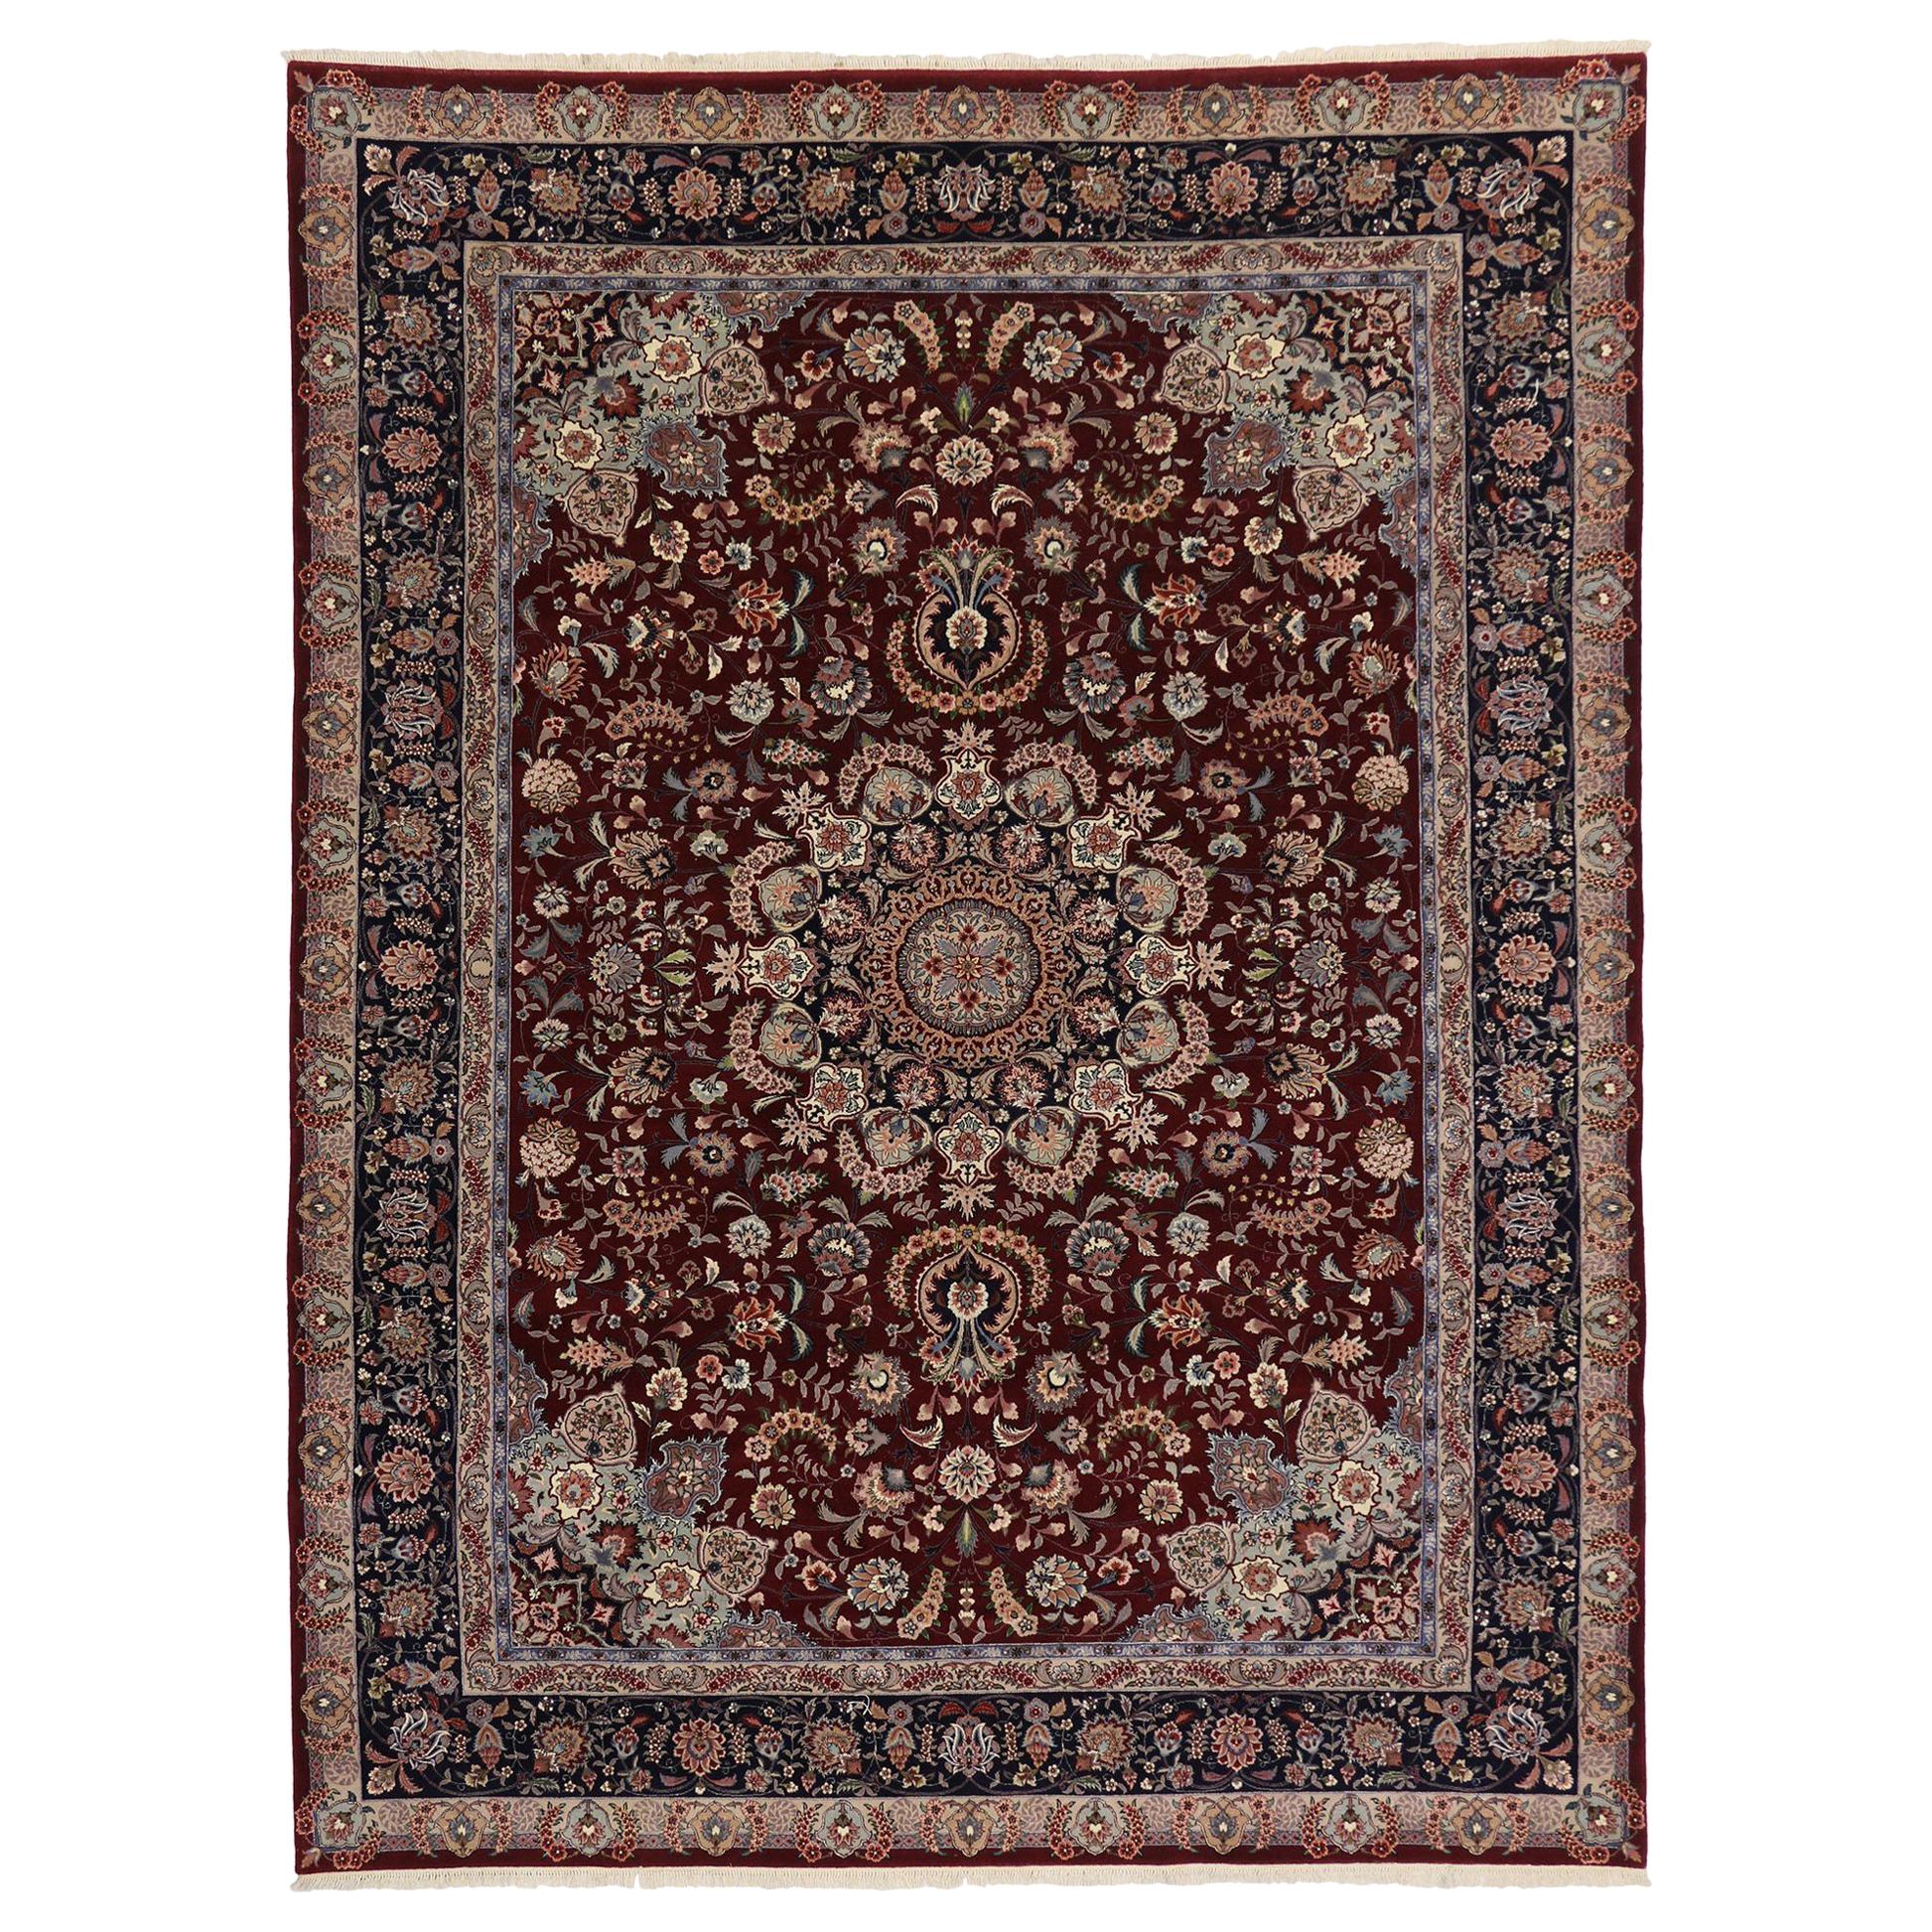 Vintage Persian Style Area Rug with Arabesque Baroque Regency Style